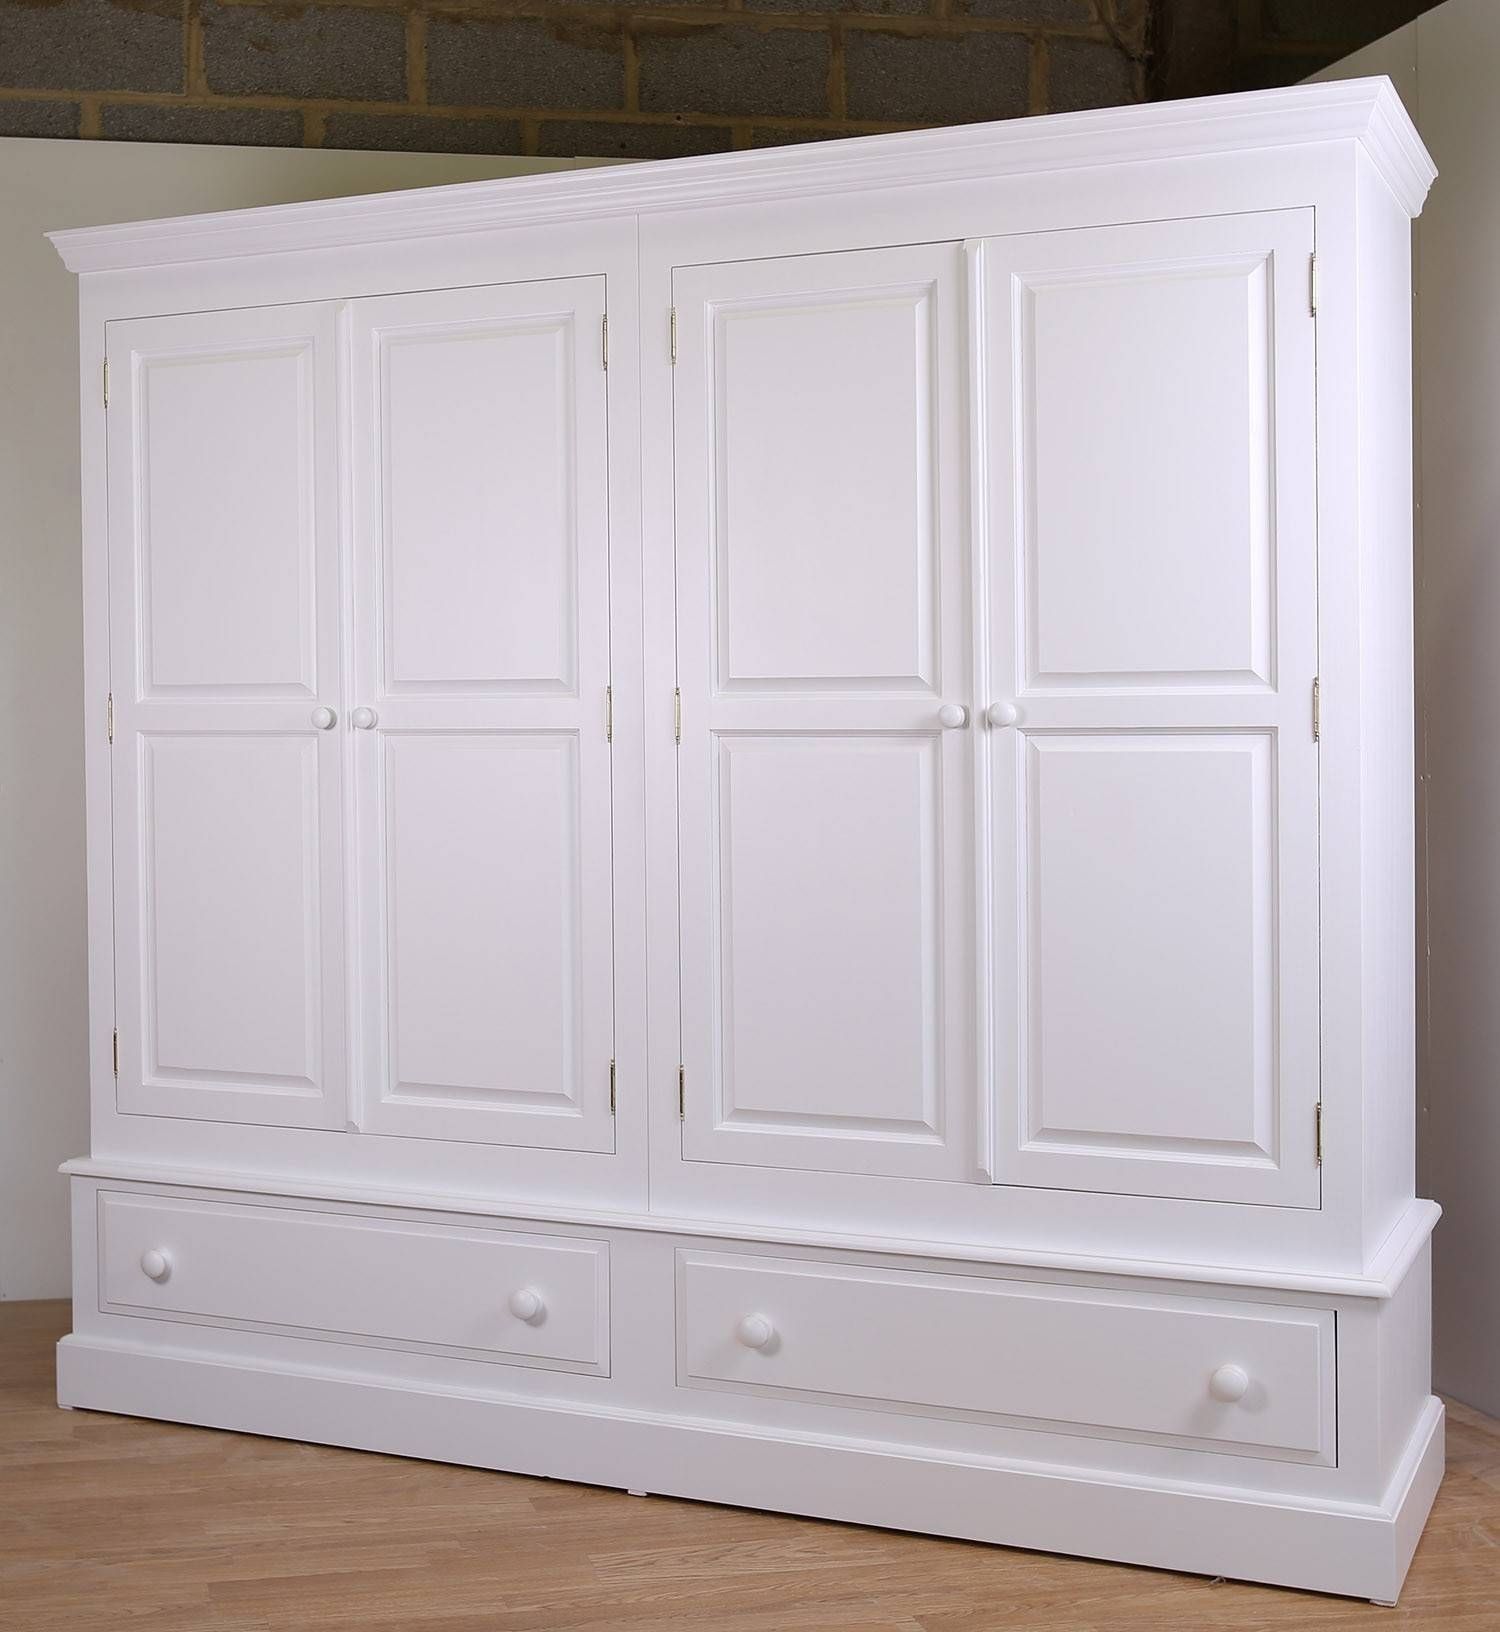 Farrow & Ball Painted 4 Door Wardrobe With Drawers In 3 Sizes With Regard To 4 Door White Wardrobes (View 1 of 15)